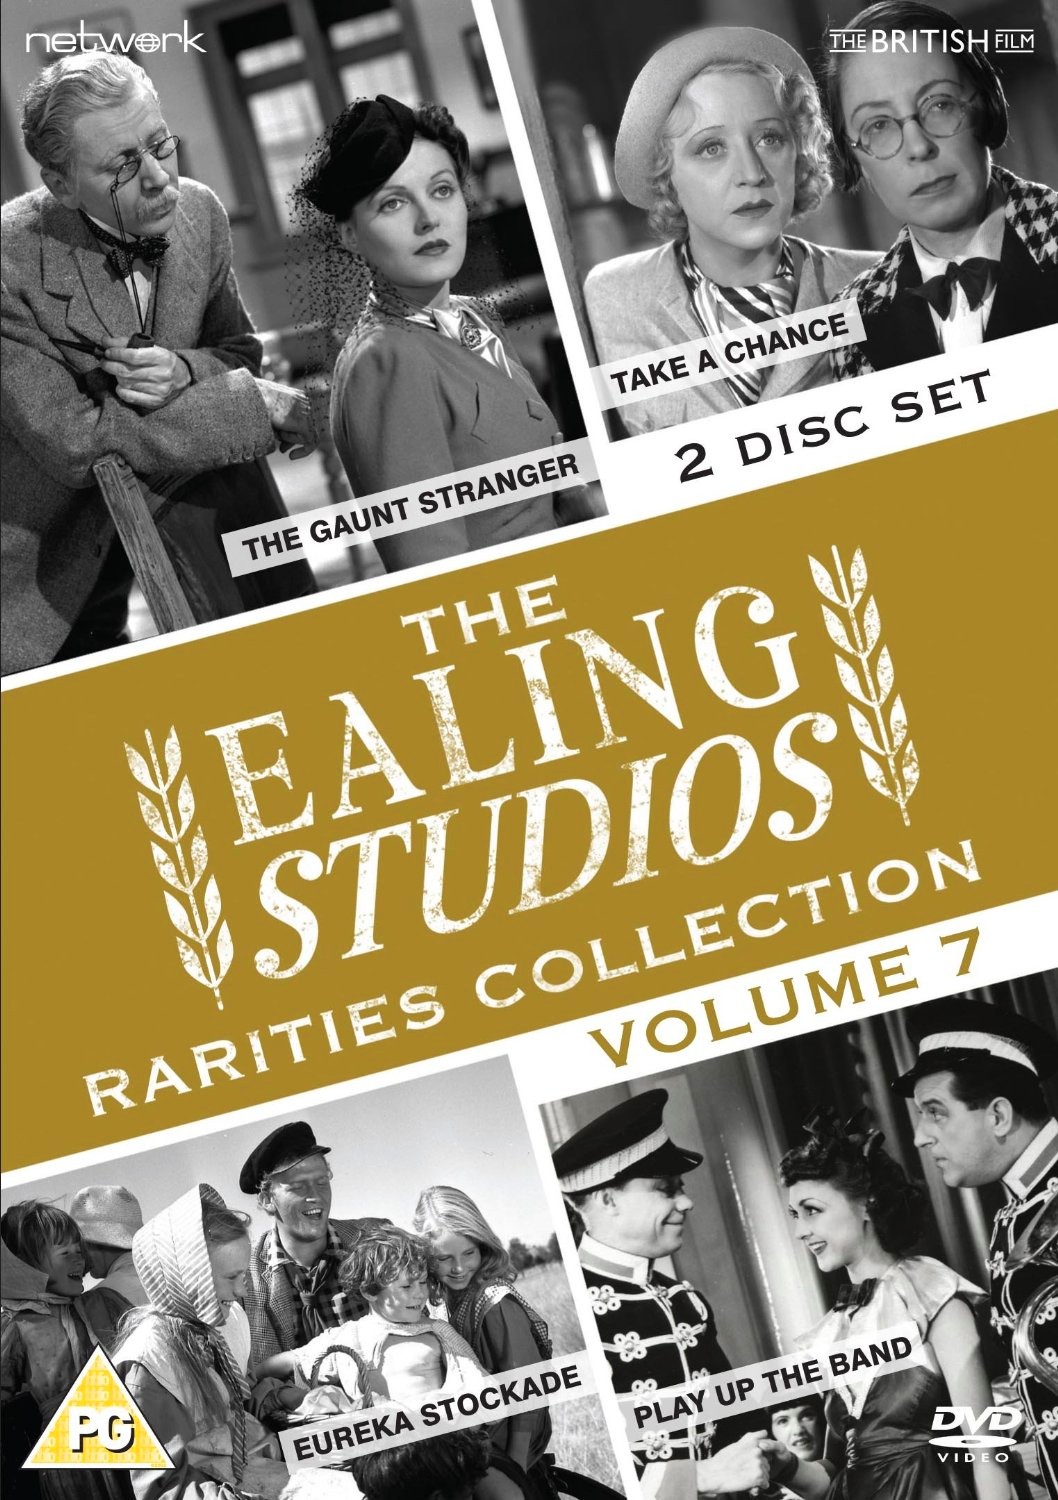 The Ealing Studios Rarities Collection DVD – Volume 7 from Network as part of the British Film collection. Features Eureka Stockade, Take A Chance, The Gaunt Stranger and Play Up the Band